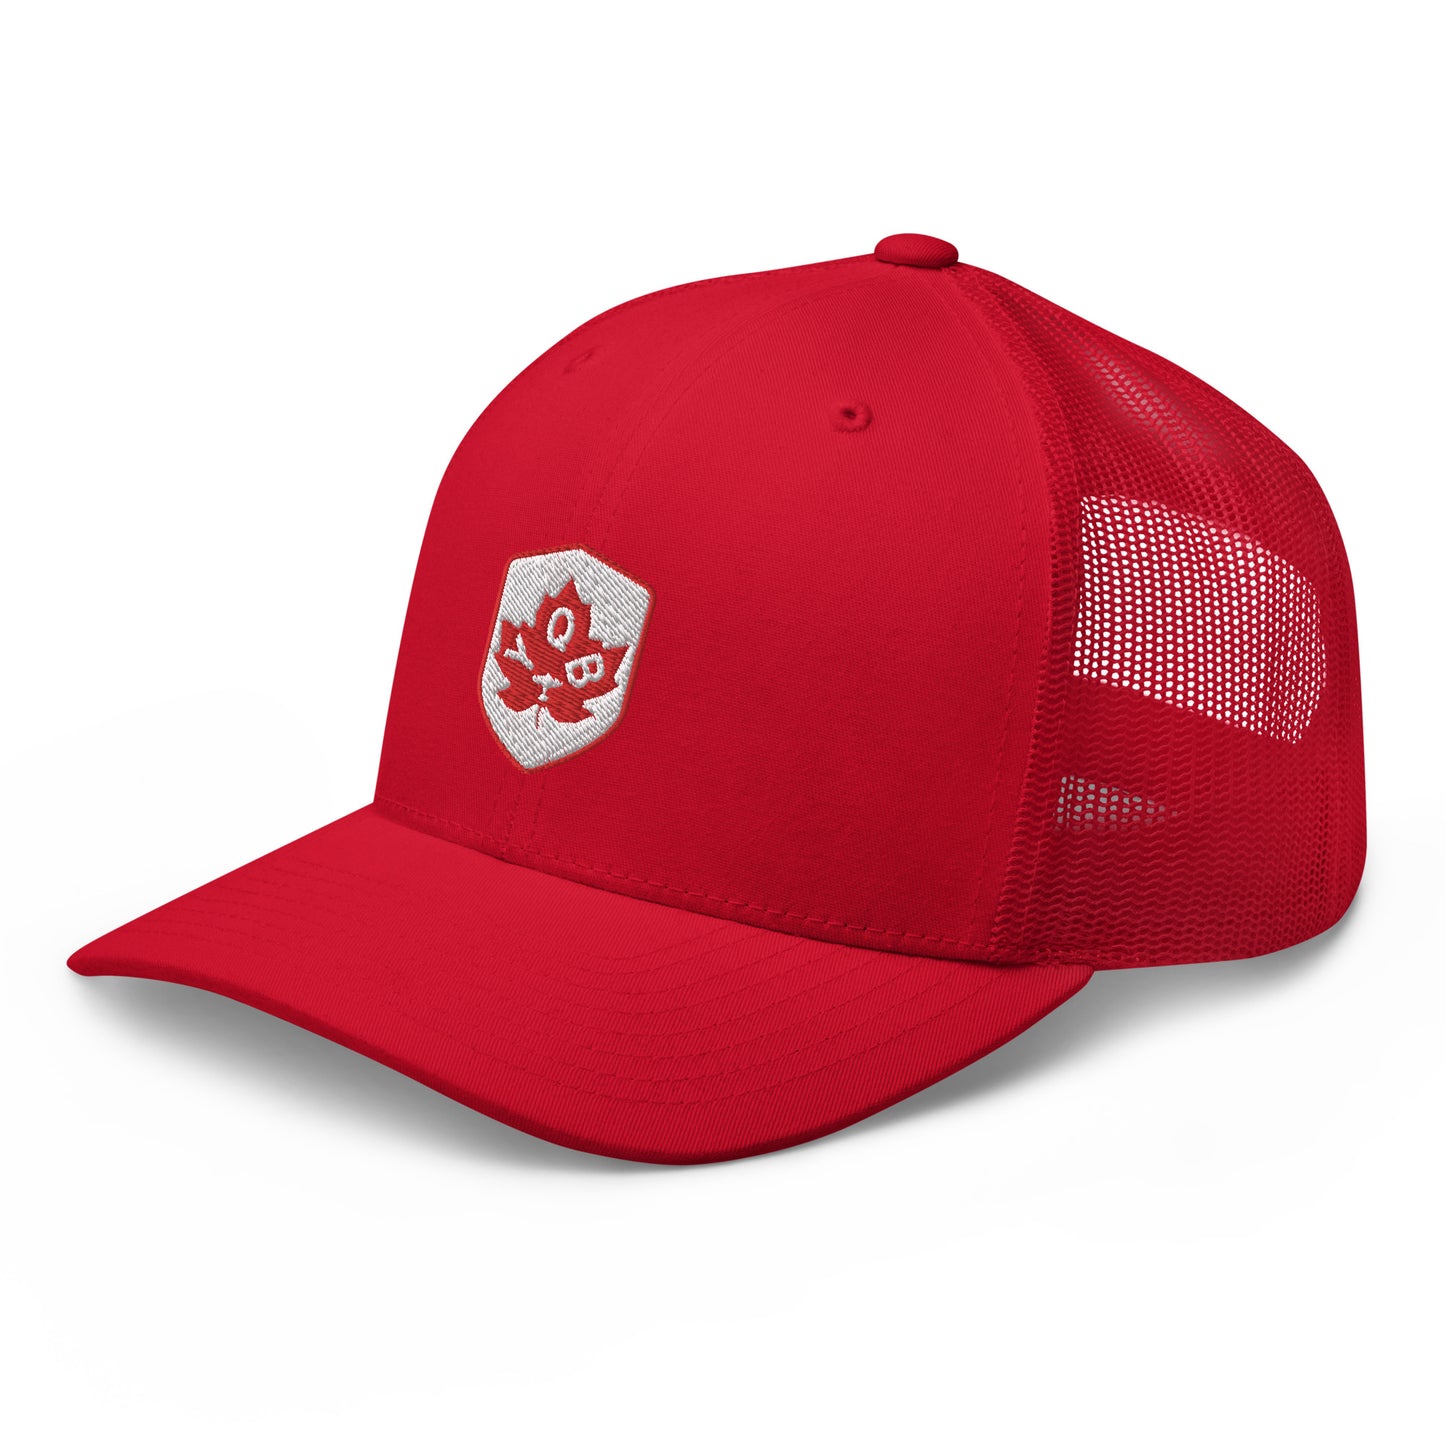 Maple Leaf Trucker Hat - Red/White • YQB Quebec City • YHM Designs - Image 25